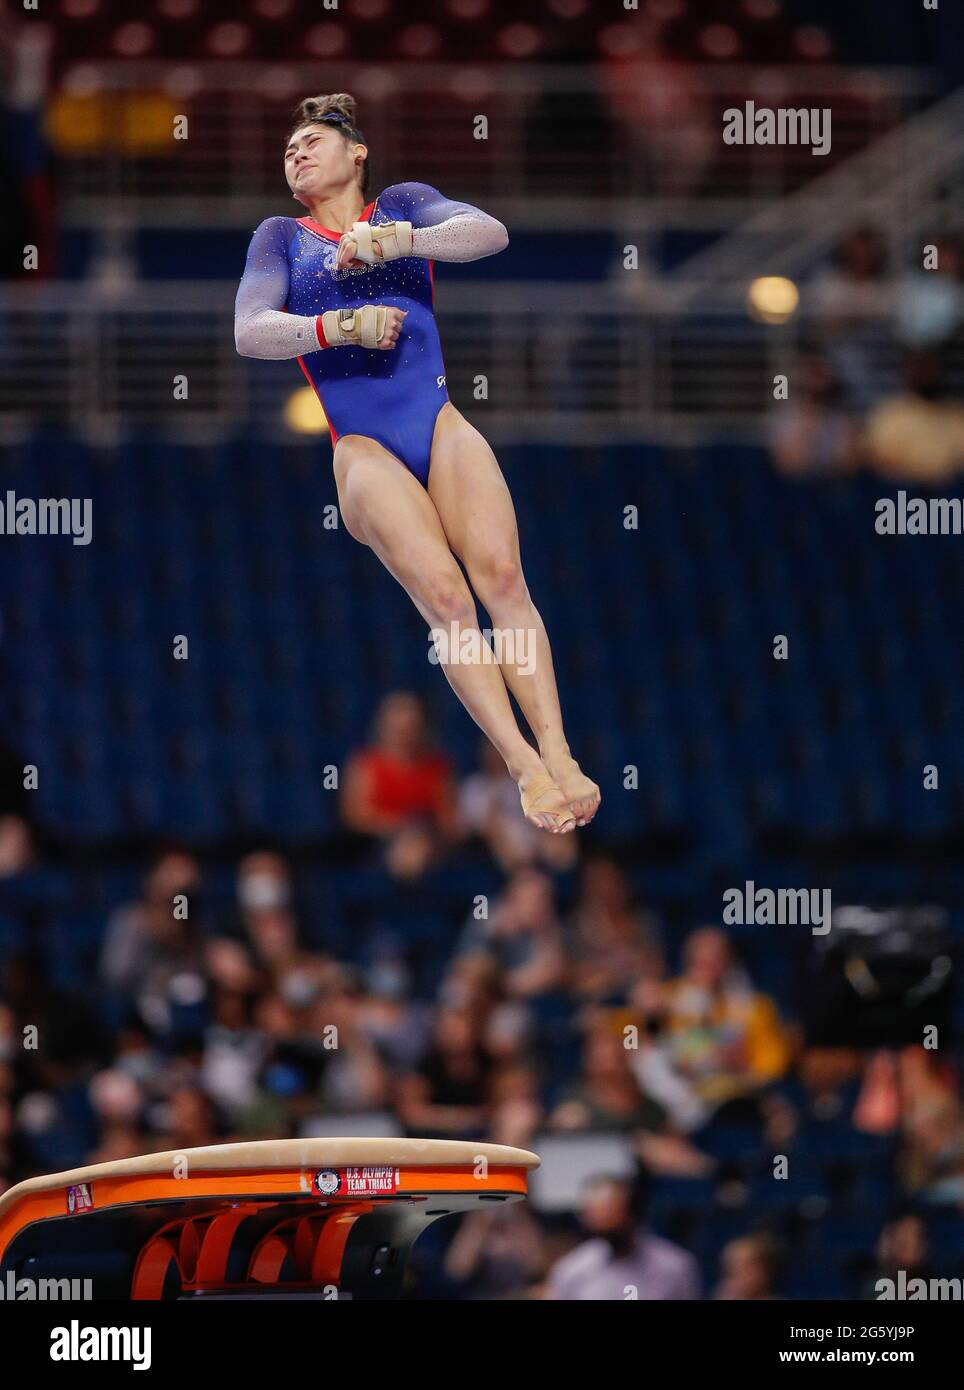 June 25, 2021: Kayla DiCello twists in the air during her vault at Day 1 of the 2021 U.S. Women's Gymnastics Olympic Team Trials at the Dome at America's Center in St. Louis, MO. Kyle Okita/CSM Stock Photo